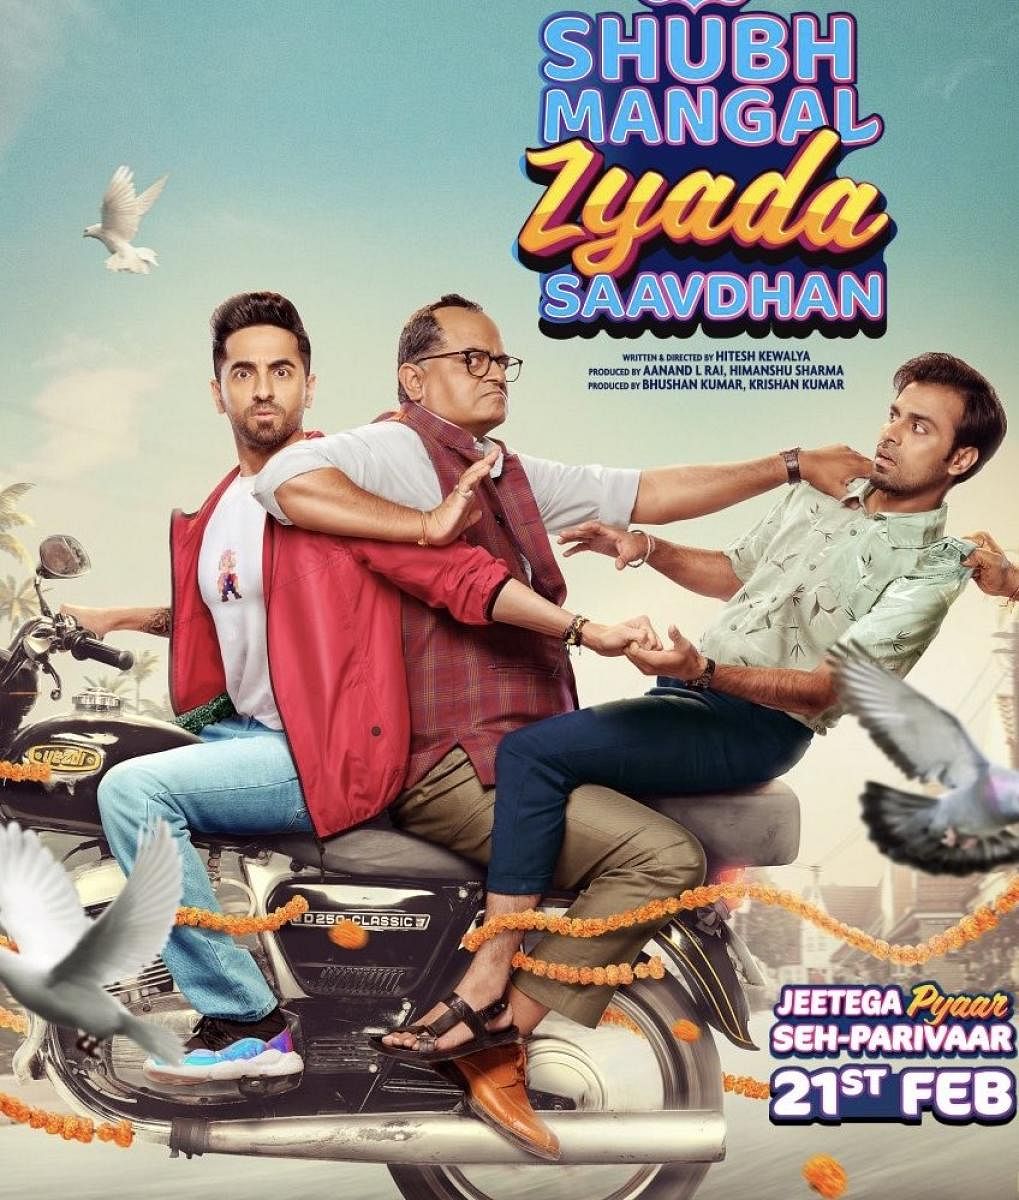 Shubh Mangal Zyada Saavdhan is doing well at the box office. (Credit: Twitter)